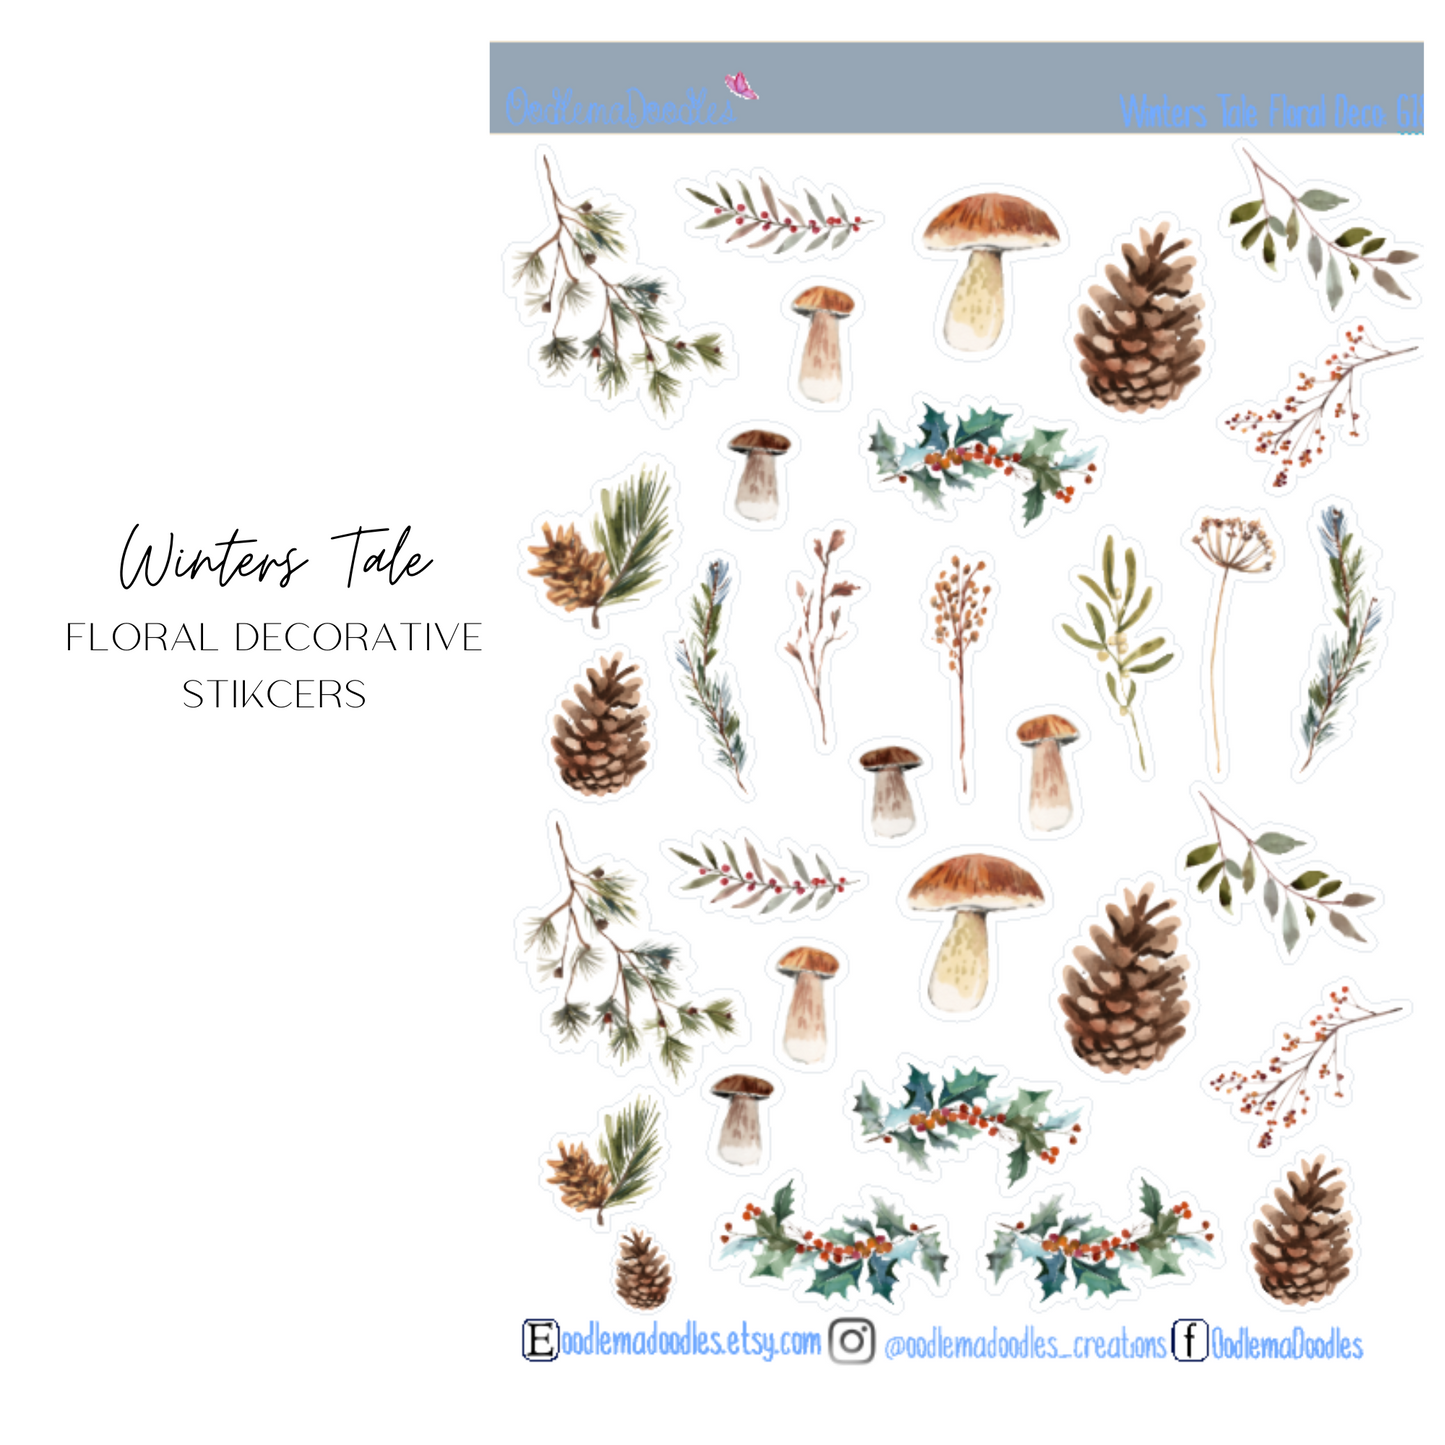 Winters Tale Floral Decorative Stickers